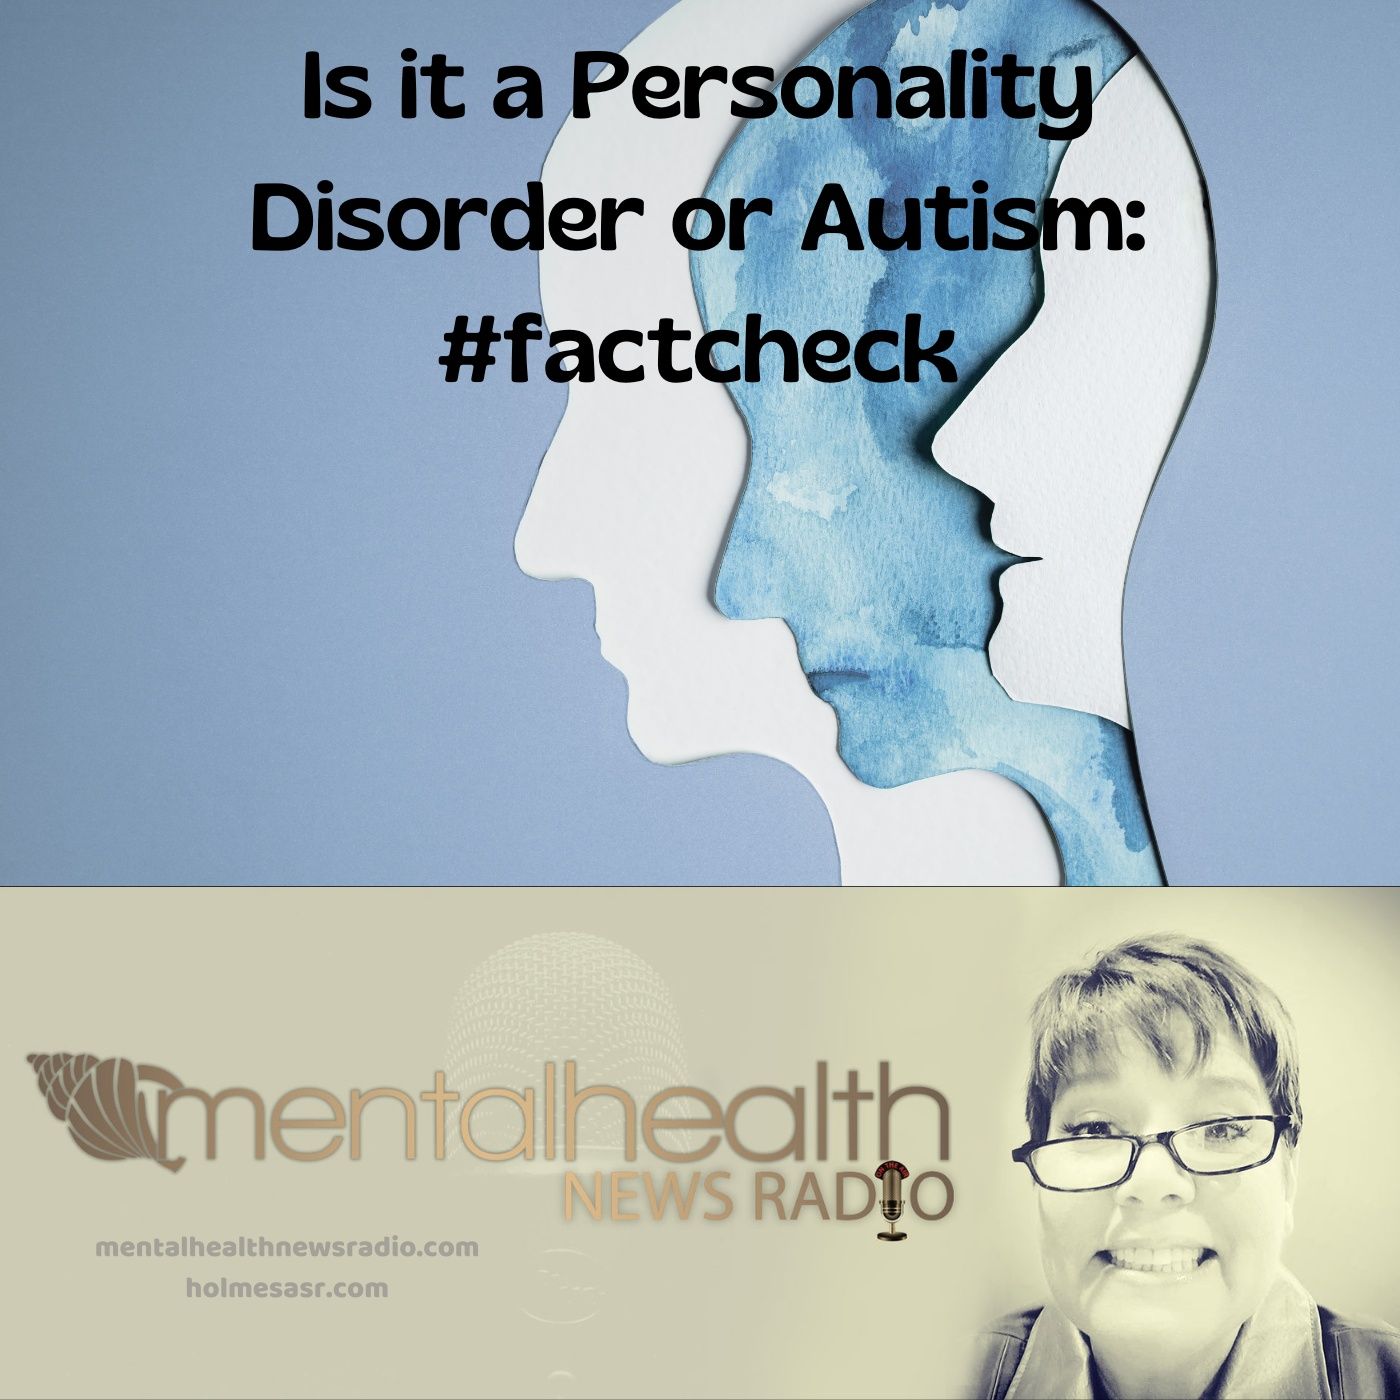 Mental Health News Radio - Is it a Personality Disorder or Autism? #factcheck